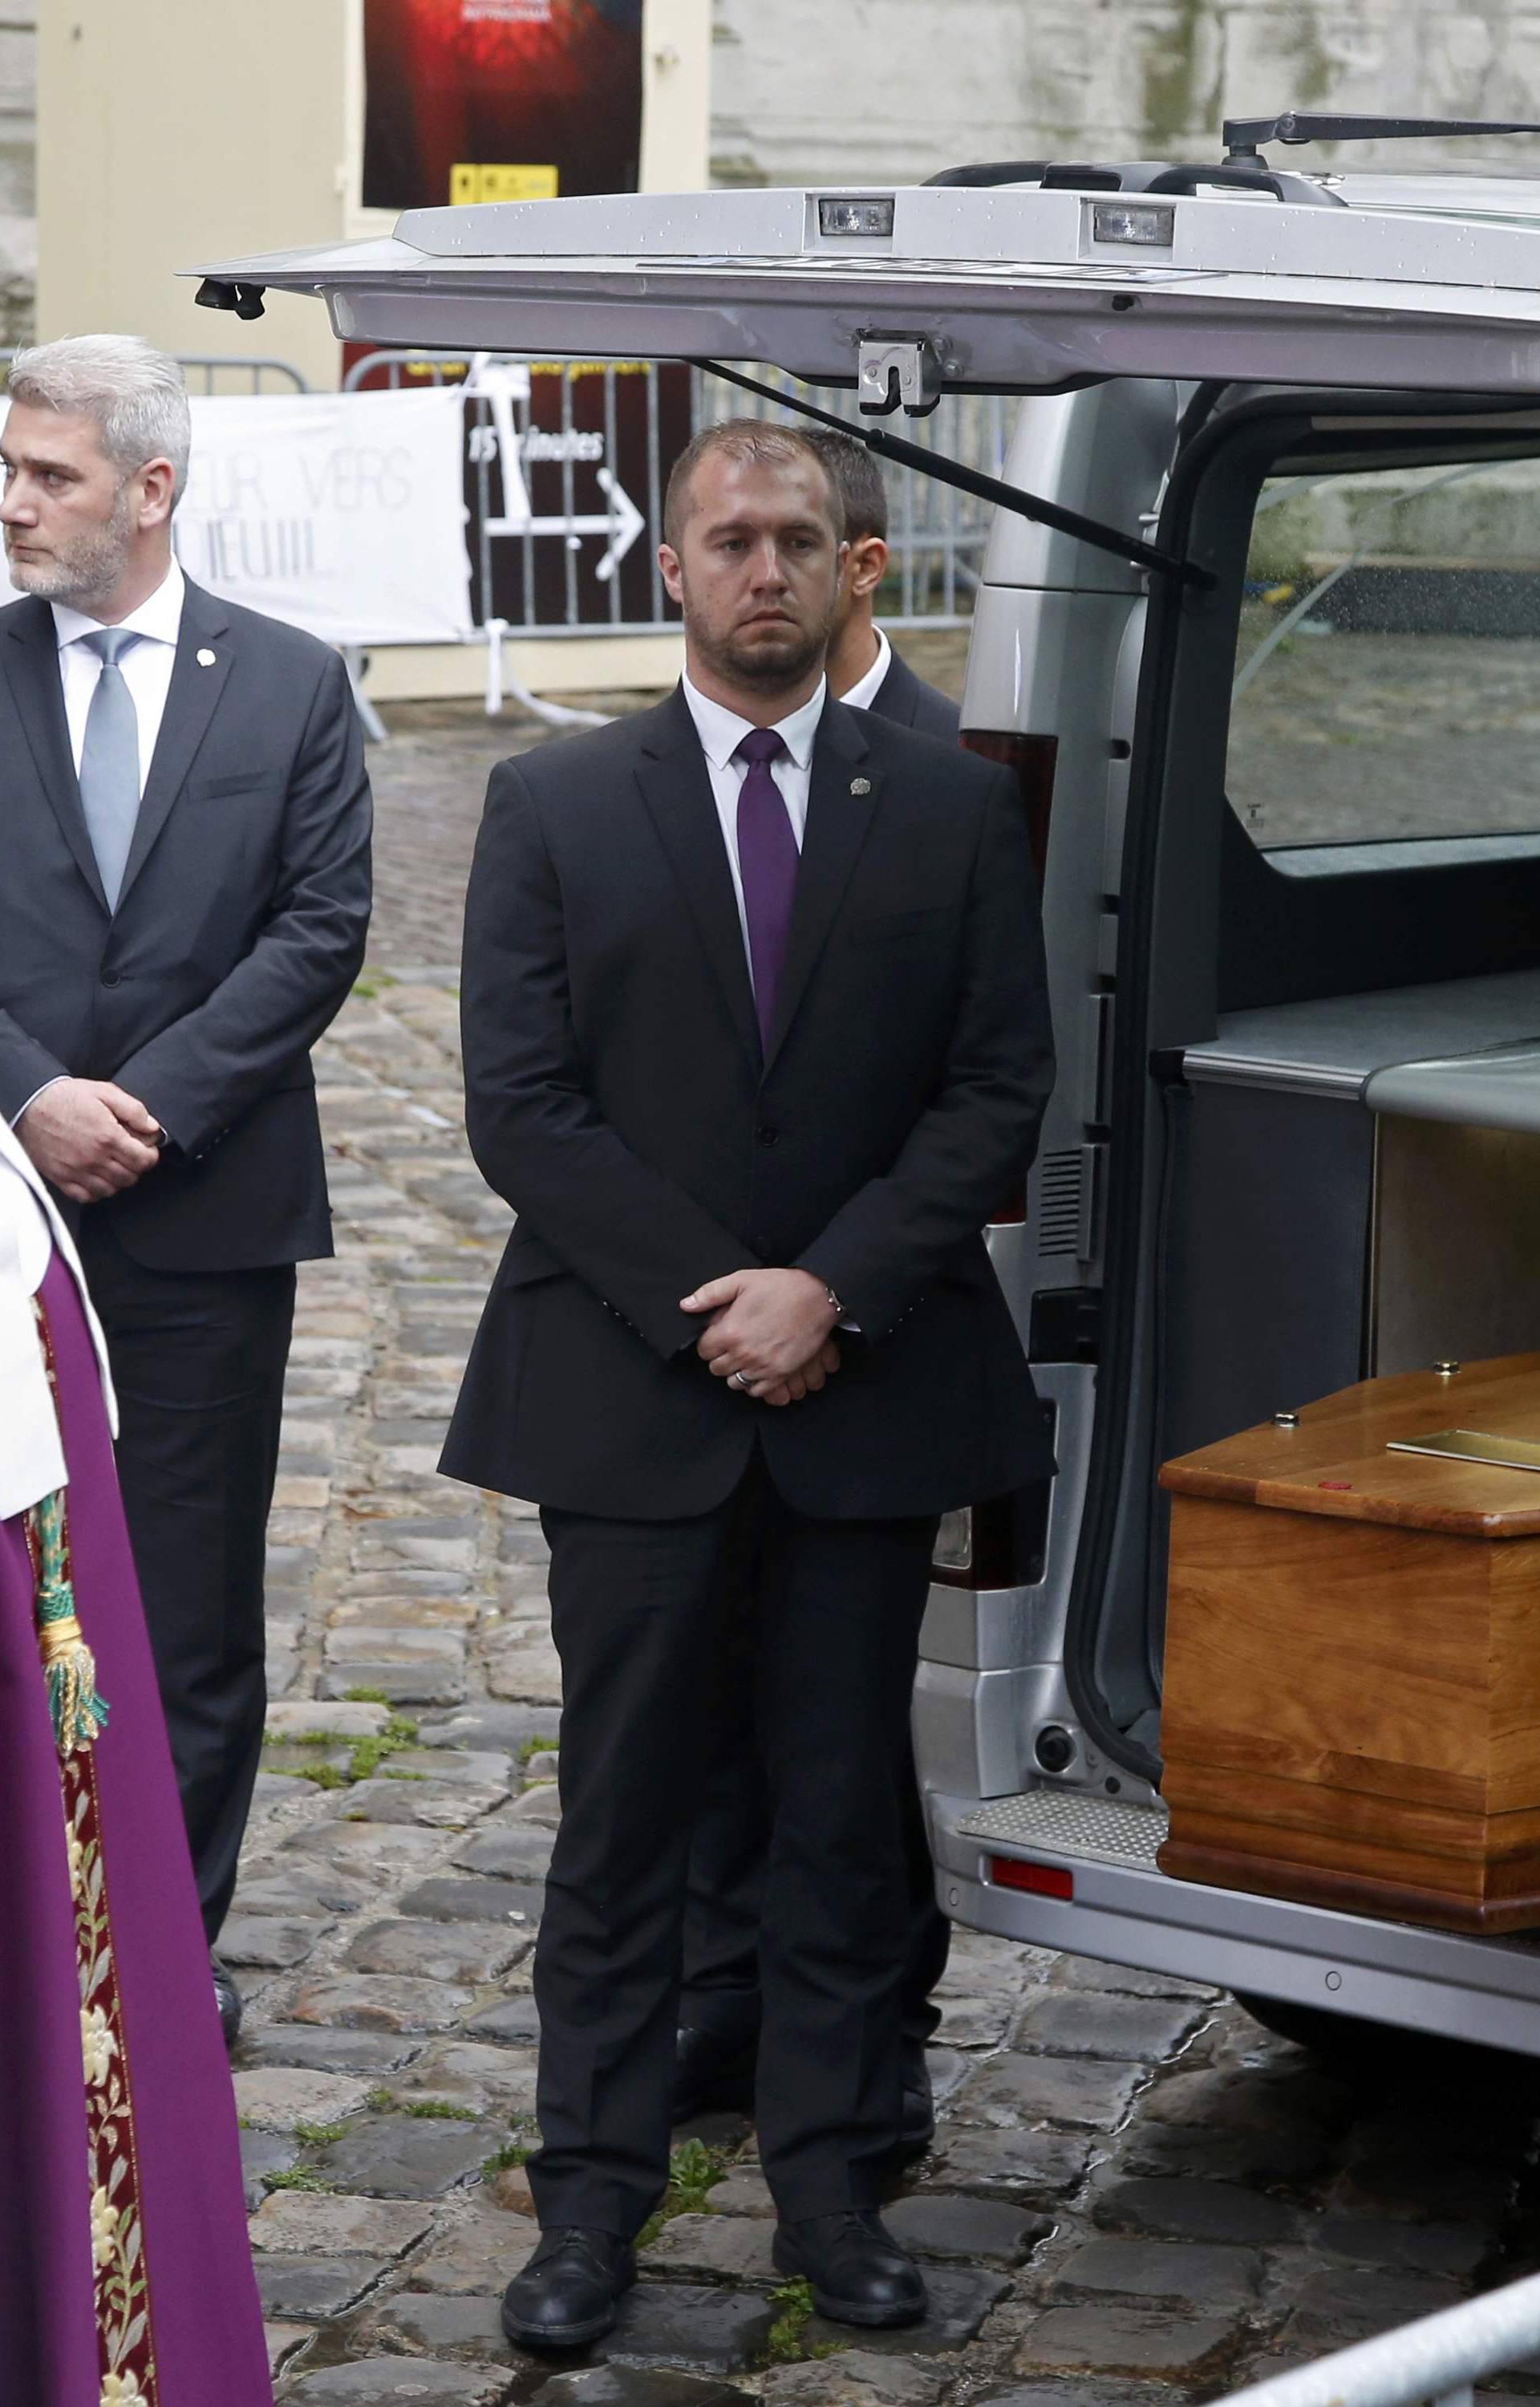 Archbishop of Rouen and Primate of Normandy Mgr Dominique Lebrun stands near the hearse carrying the coffin of slain French parish priest Father Jacques Hamel after a funeral ceremony at the Cathedral in Rouen